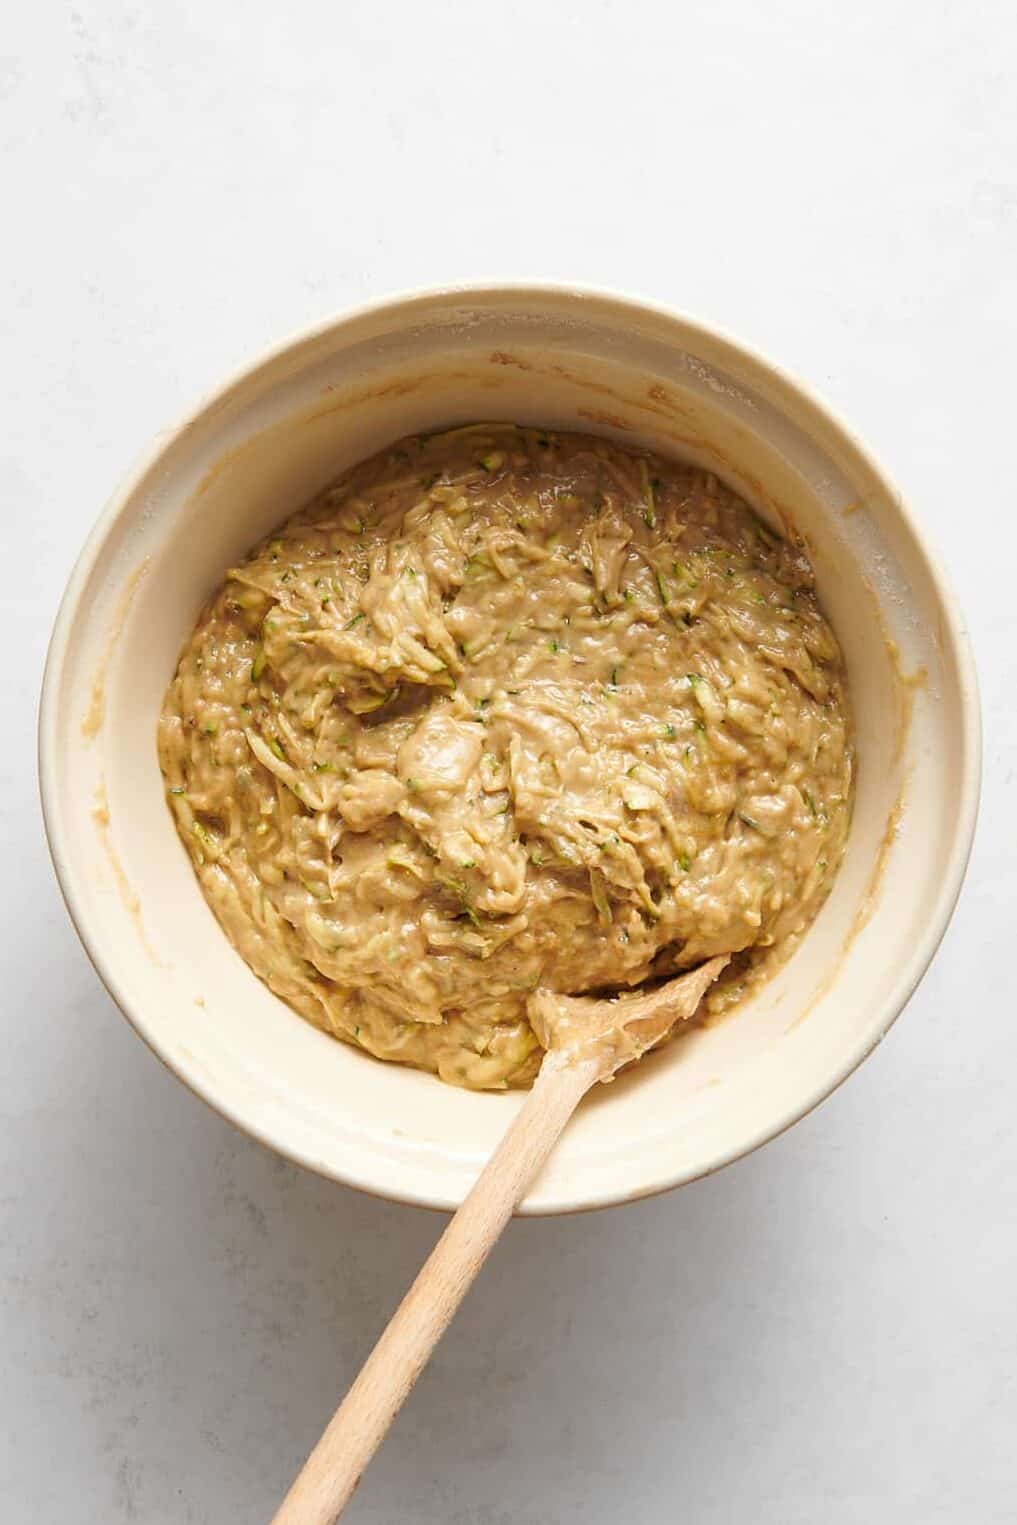 zucchini muffin batter sitting in a ceramic mixing bowl with a wooden spoon